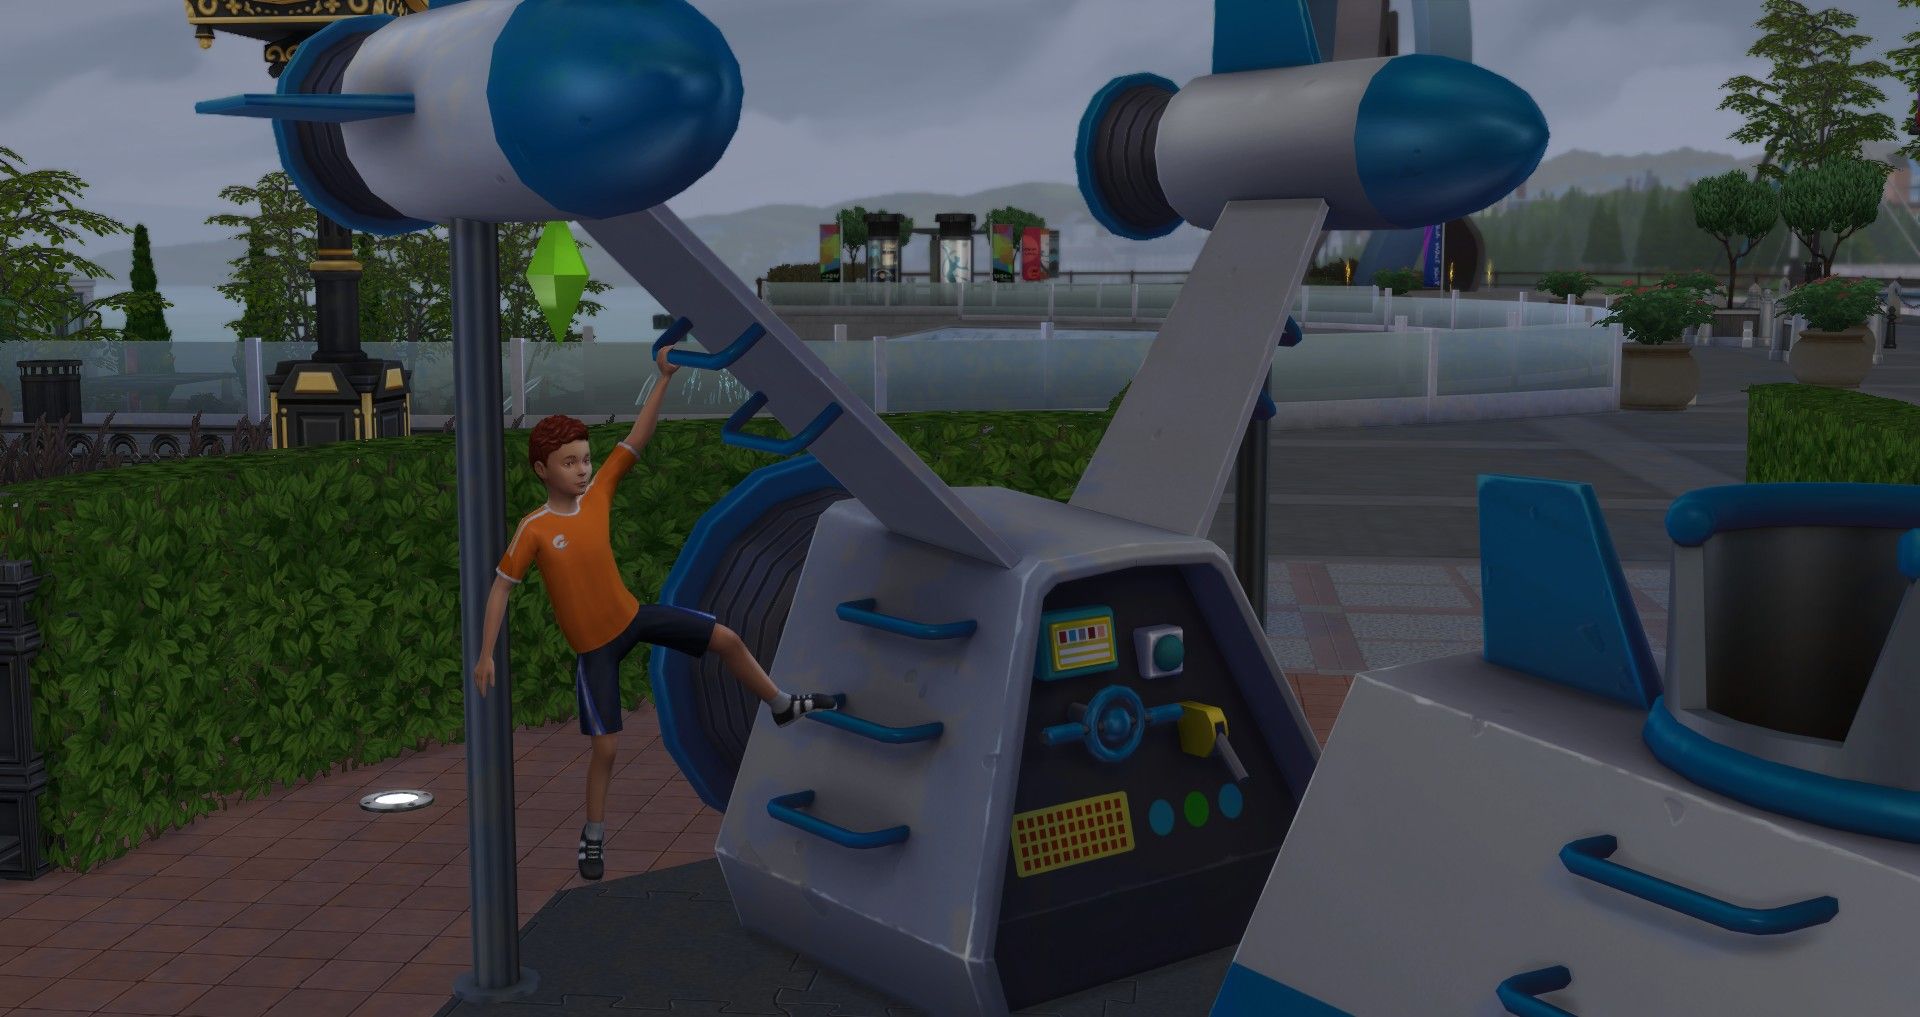 a boy playing on the spaceship playground equipment in windenburg the sims 4 child skills motor